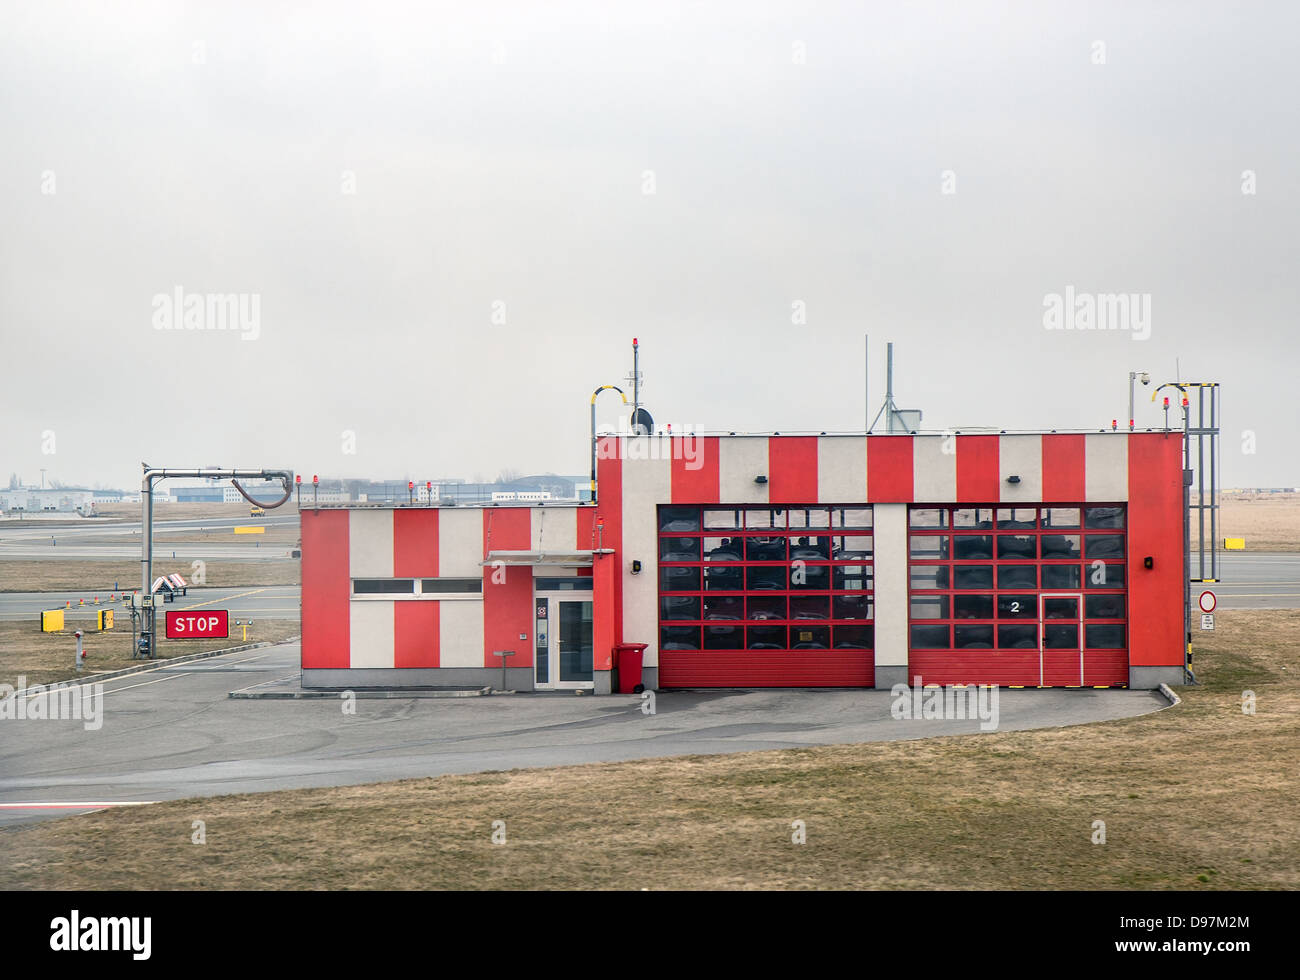 fire station at the airport- Vaclav Havel Airport Prague Stock Photo